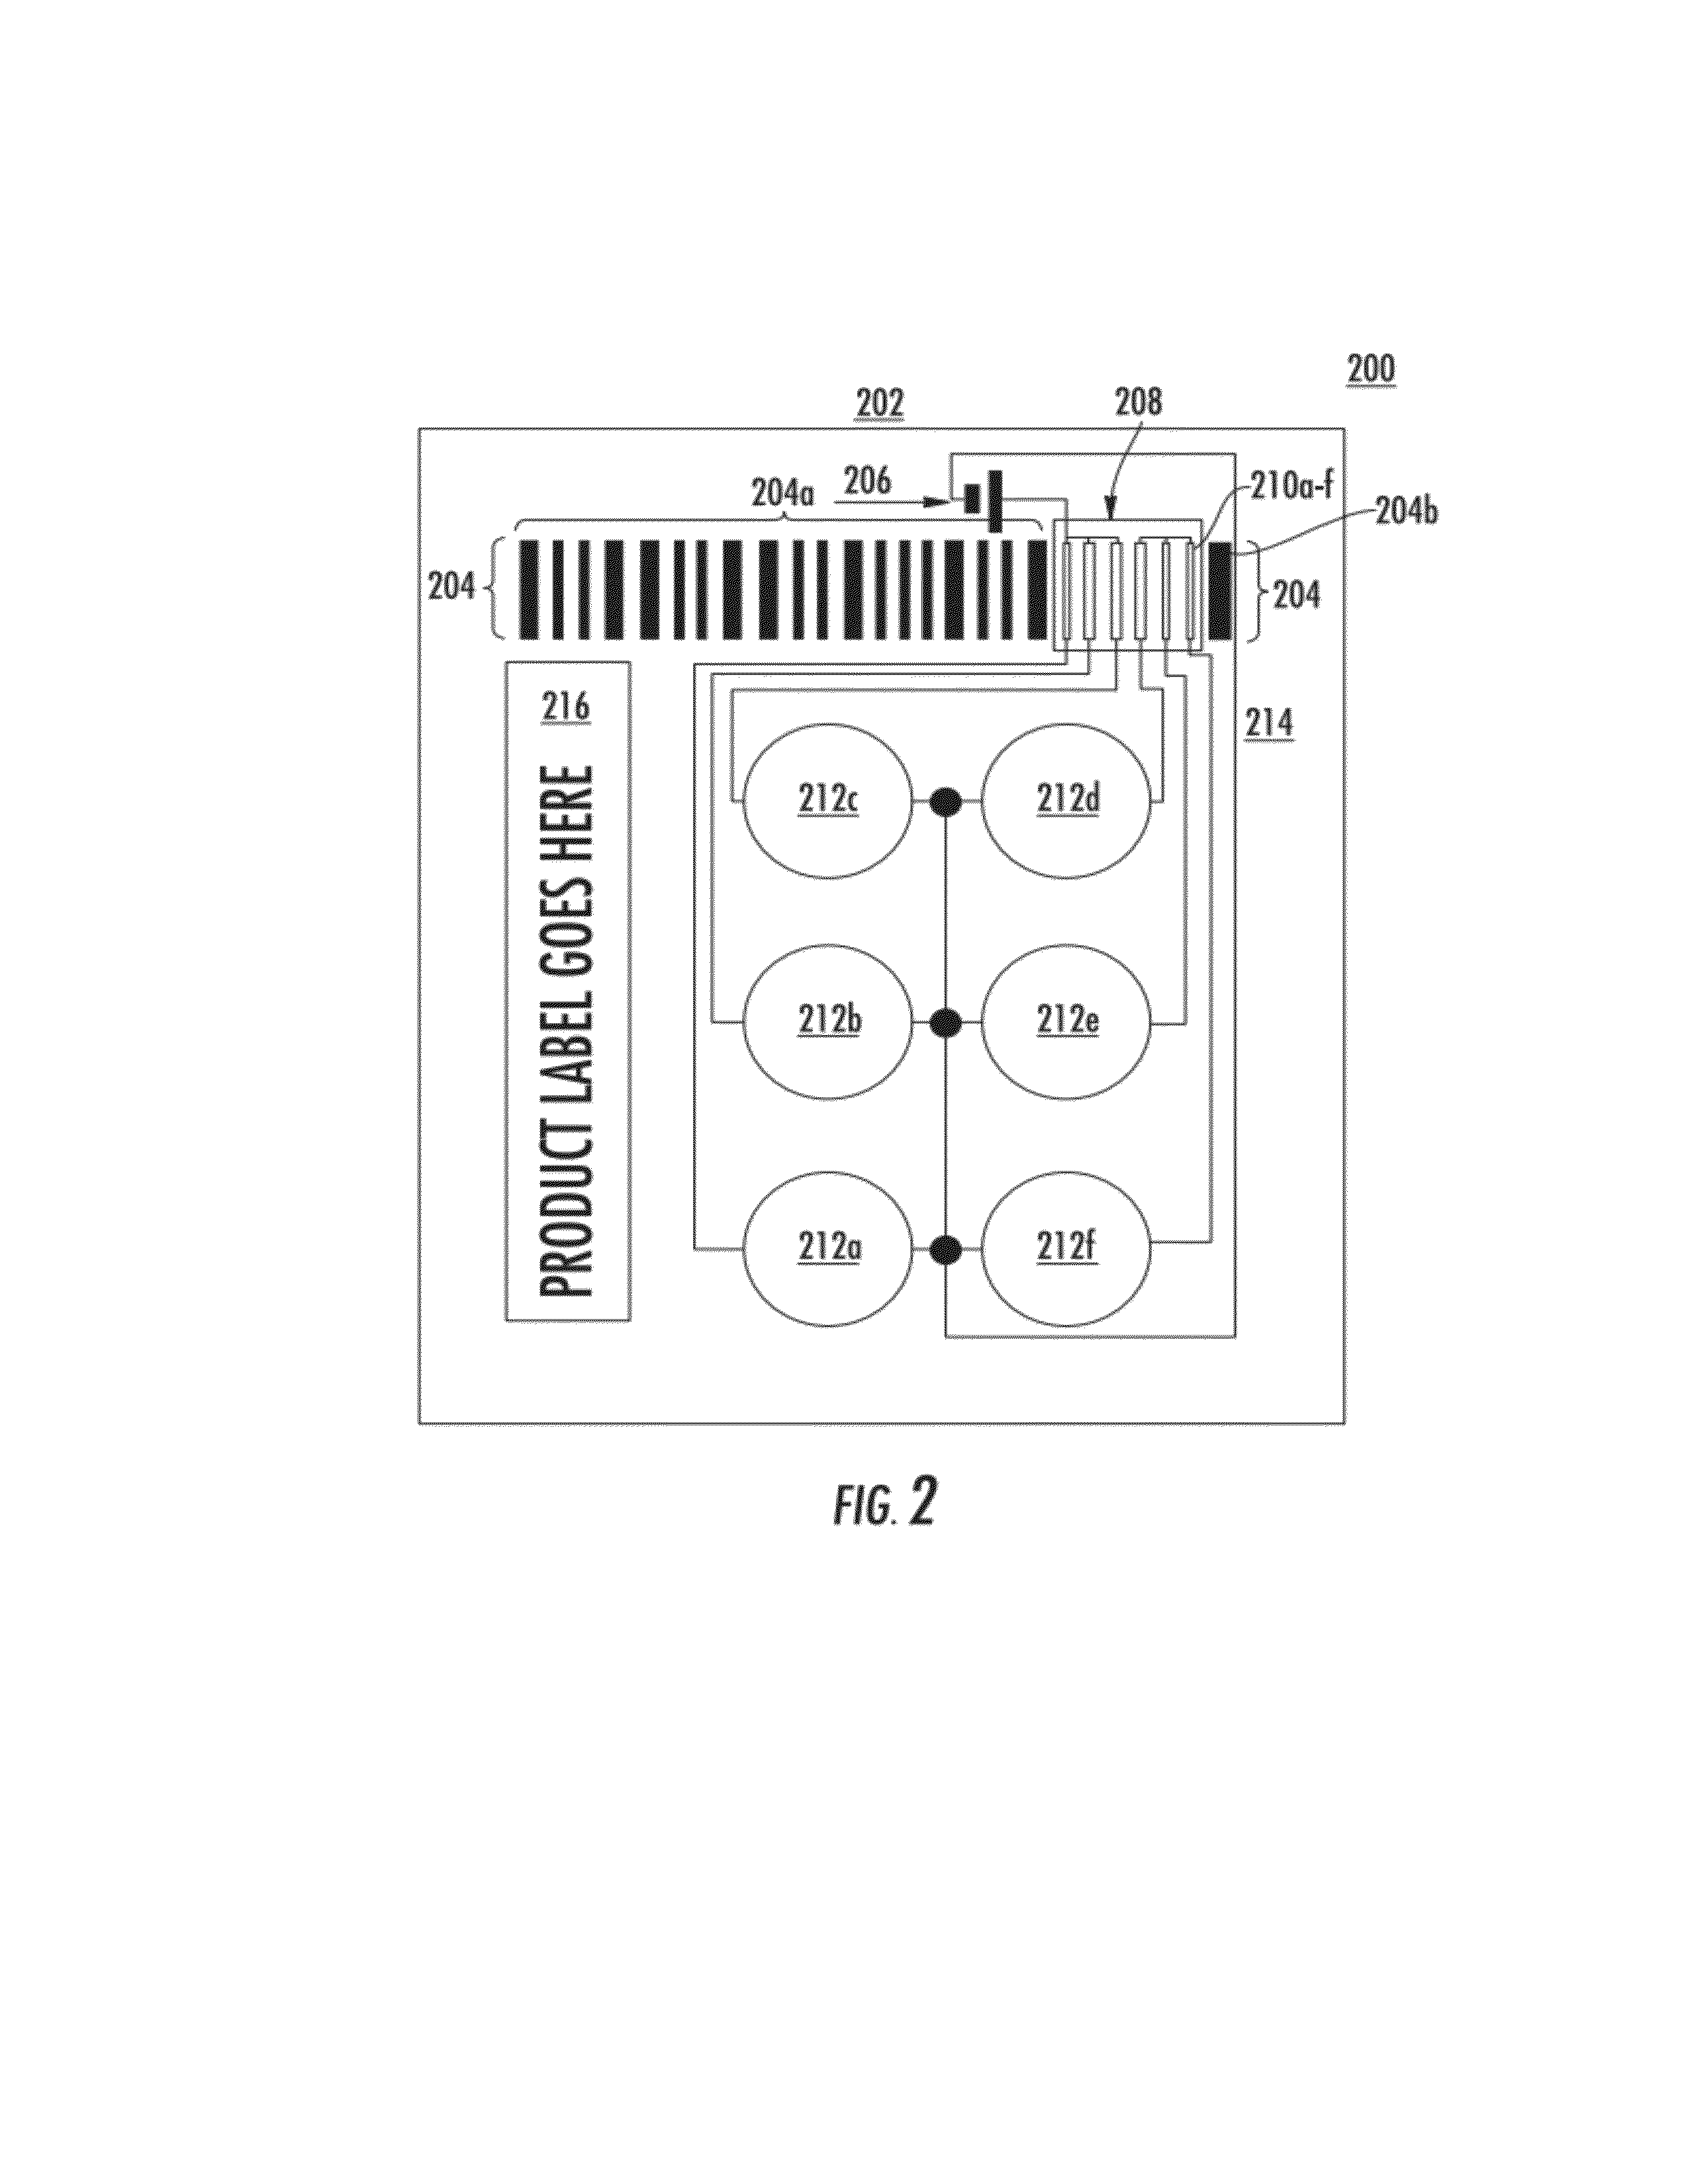 System and method for automating and verifying medication compliance